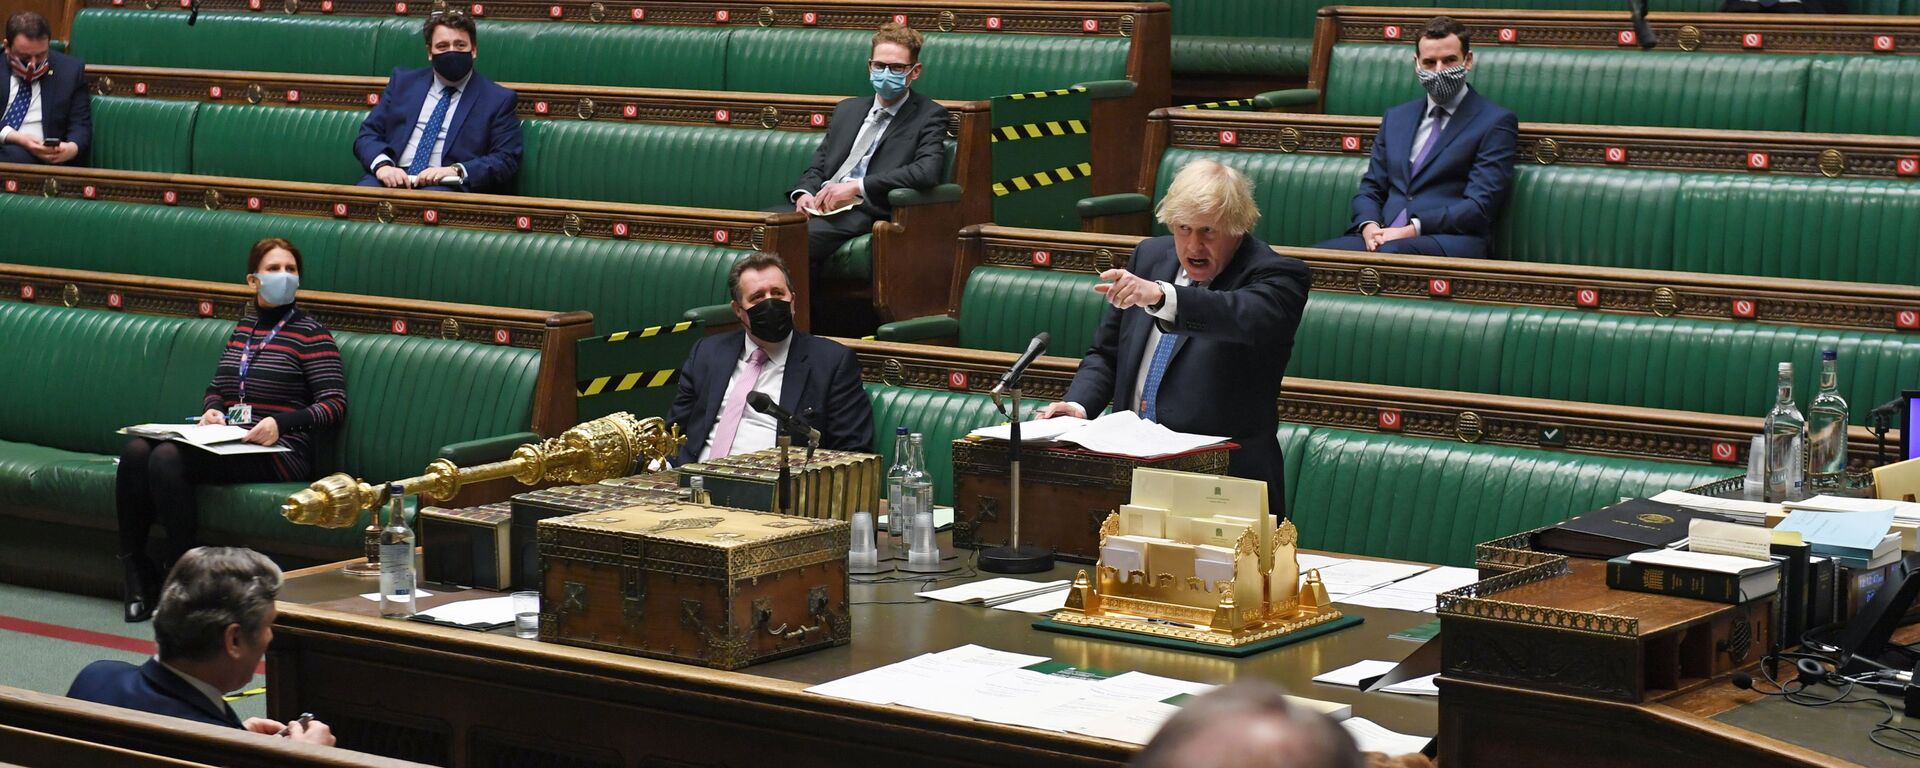 Britain's Prime Minister Boris Johnson points during the weekly question time debate at the House of Commons in London, Britain March 10, 2021 - Sputnik International, 1920, 14.12.2021